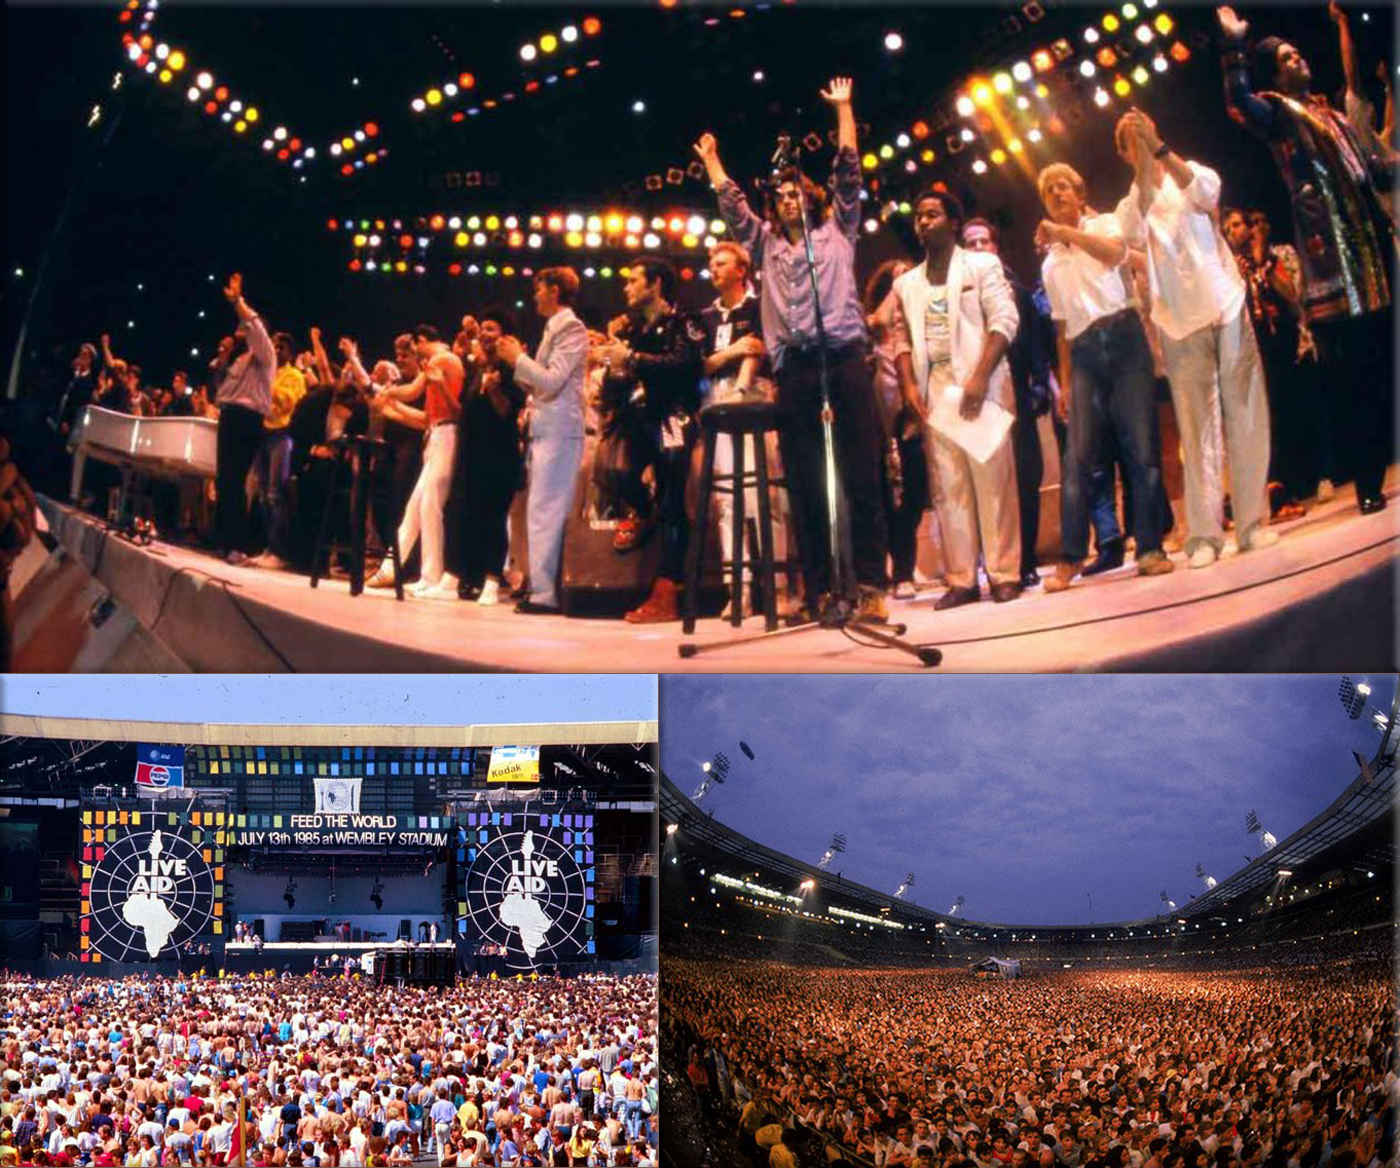 Live Aid benefit concert takes place in London, England, United Kingdom and Philadelphia, Pennsylvania, as well as other venues such as Sydney, Australia and Moscow, Russia, Soviet Union